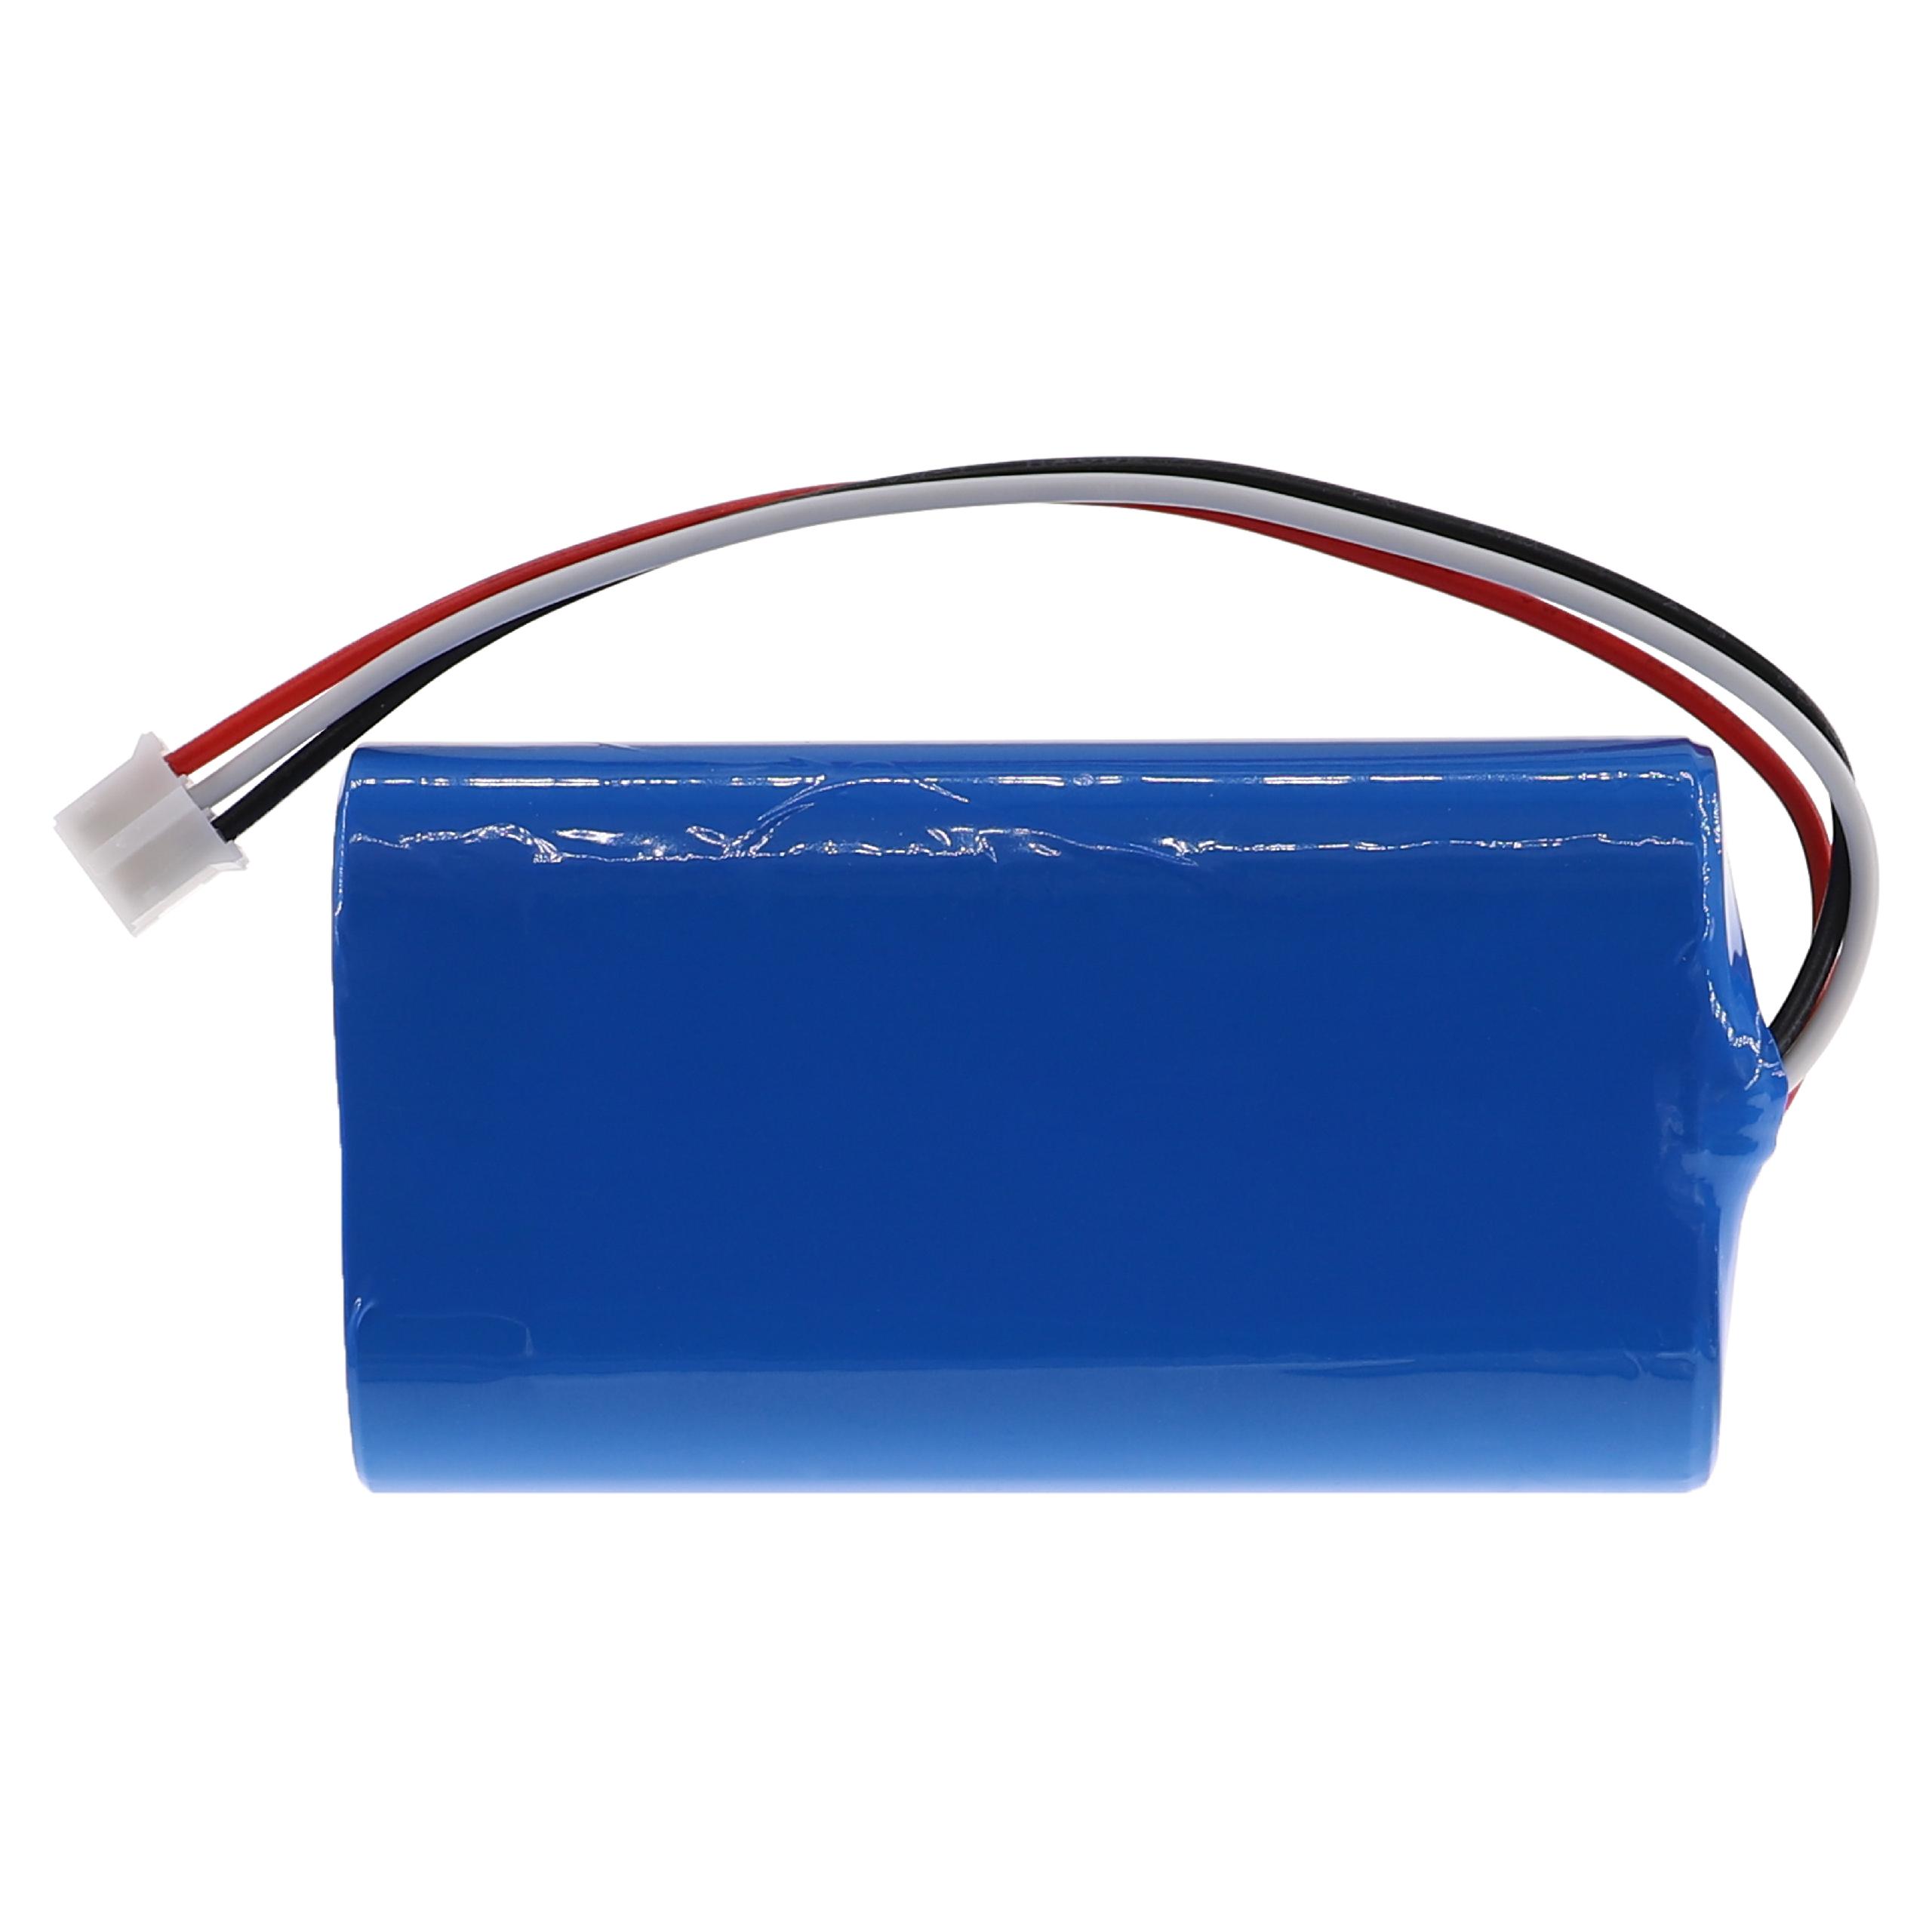 DAB Radio Battery Replacement for Albrecht 27856 - 5200mAh 3.7V Li-Ion